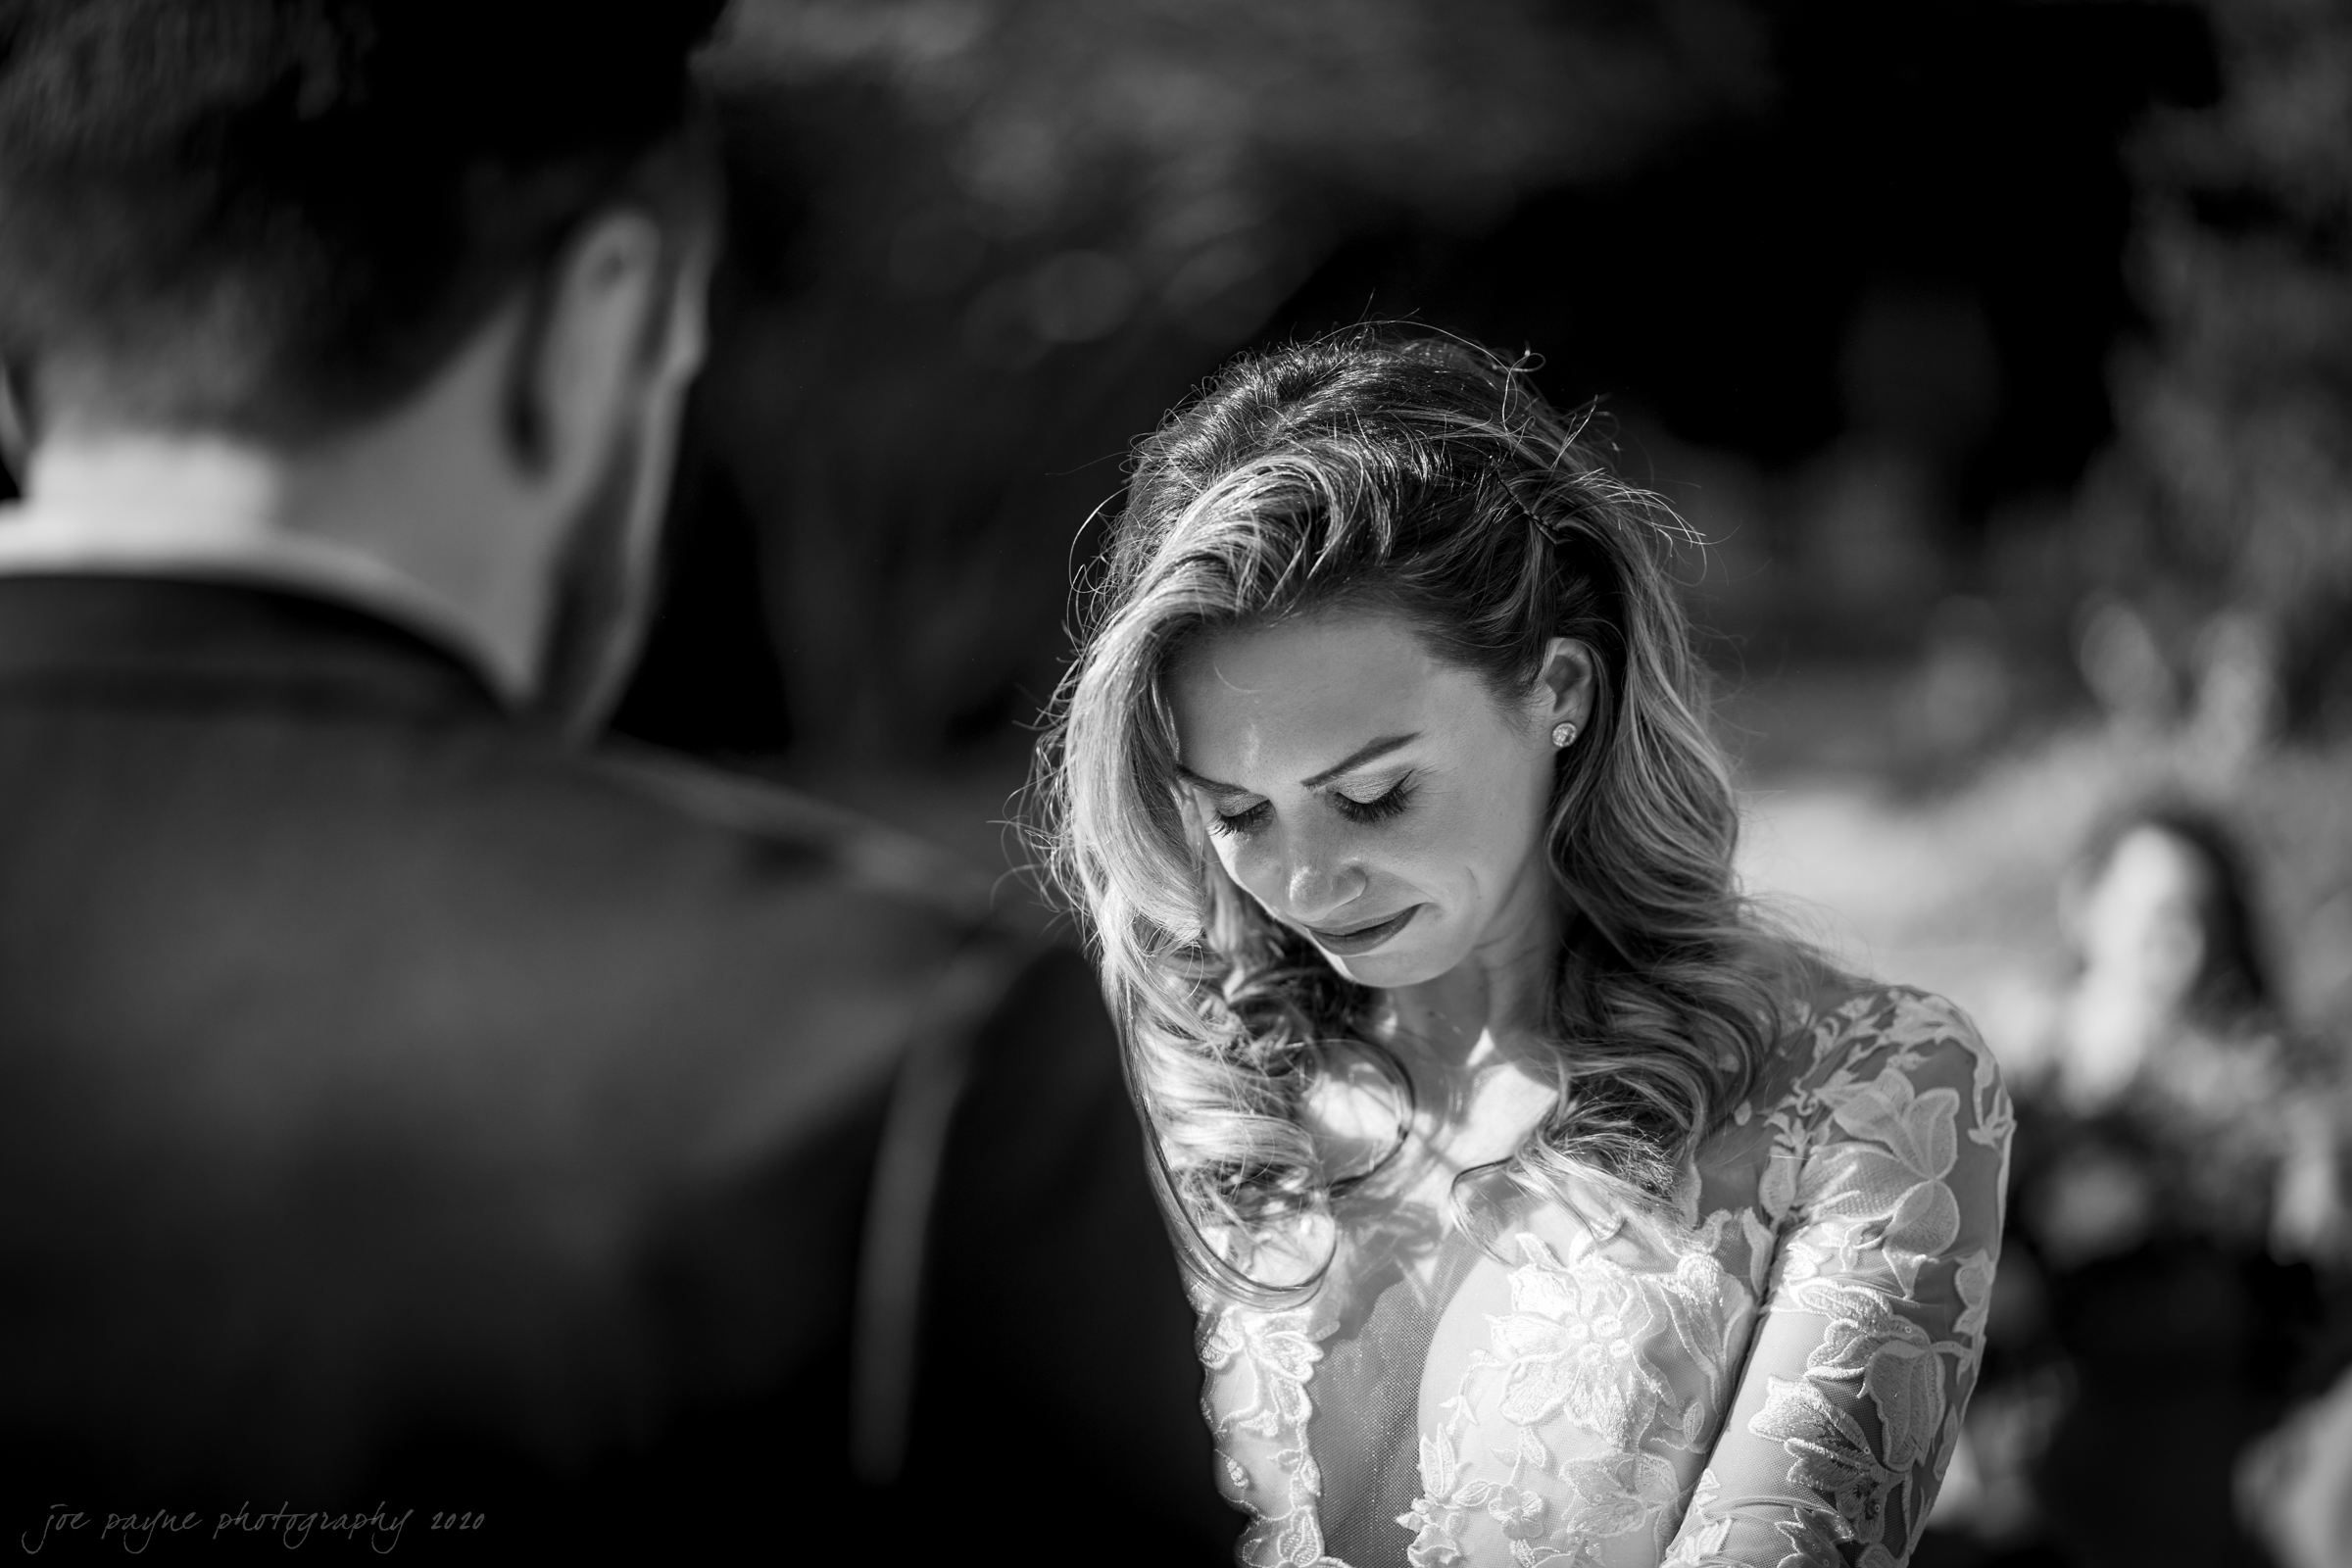 umstead hotel park wedding photography brittany harrison 22